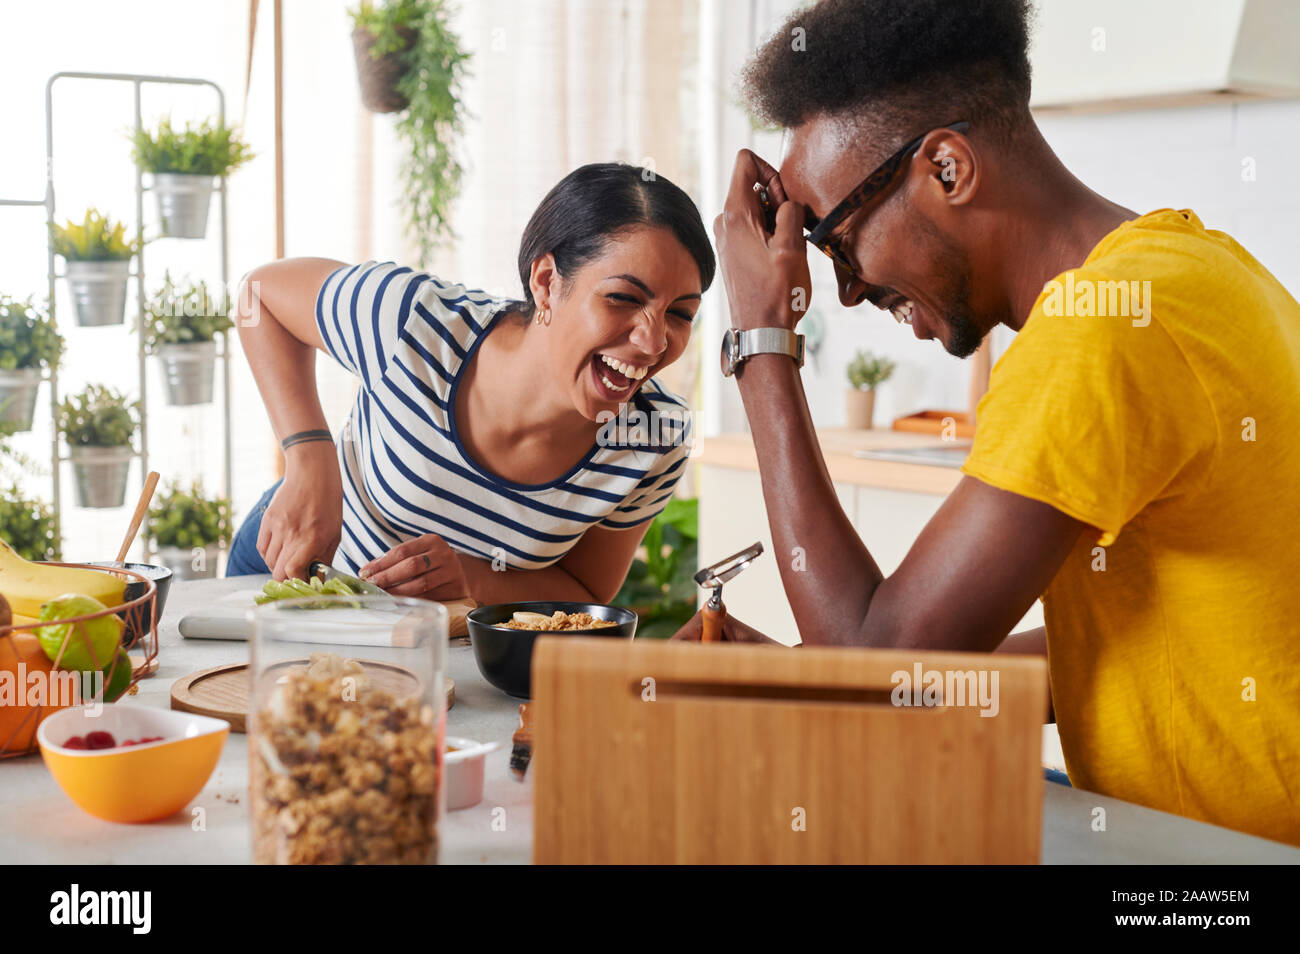 Multiethnic couple laughing, breakfasting together in the kitchen Stock Photo